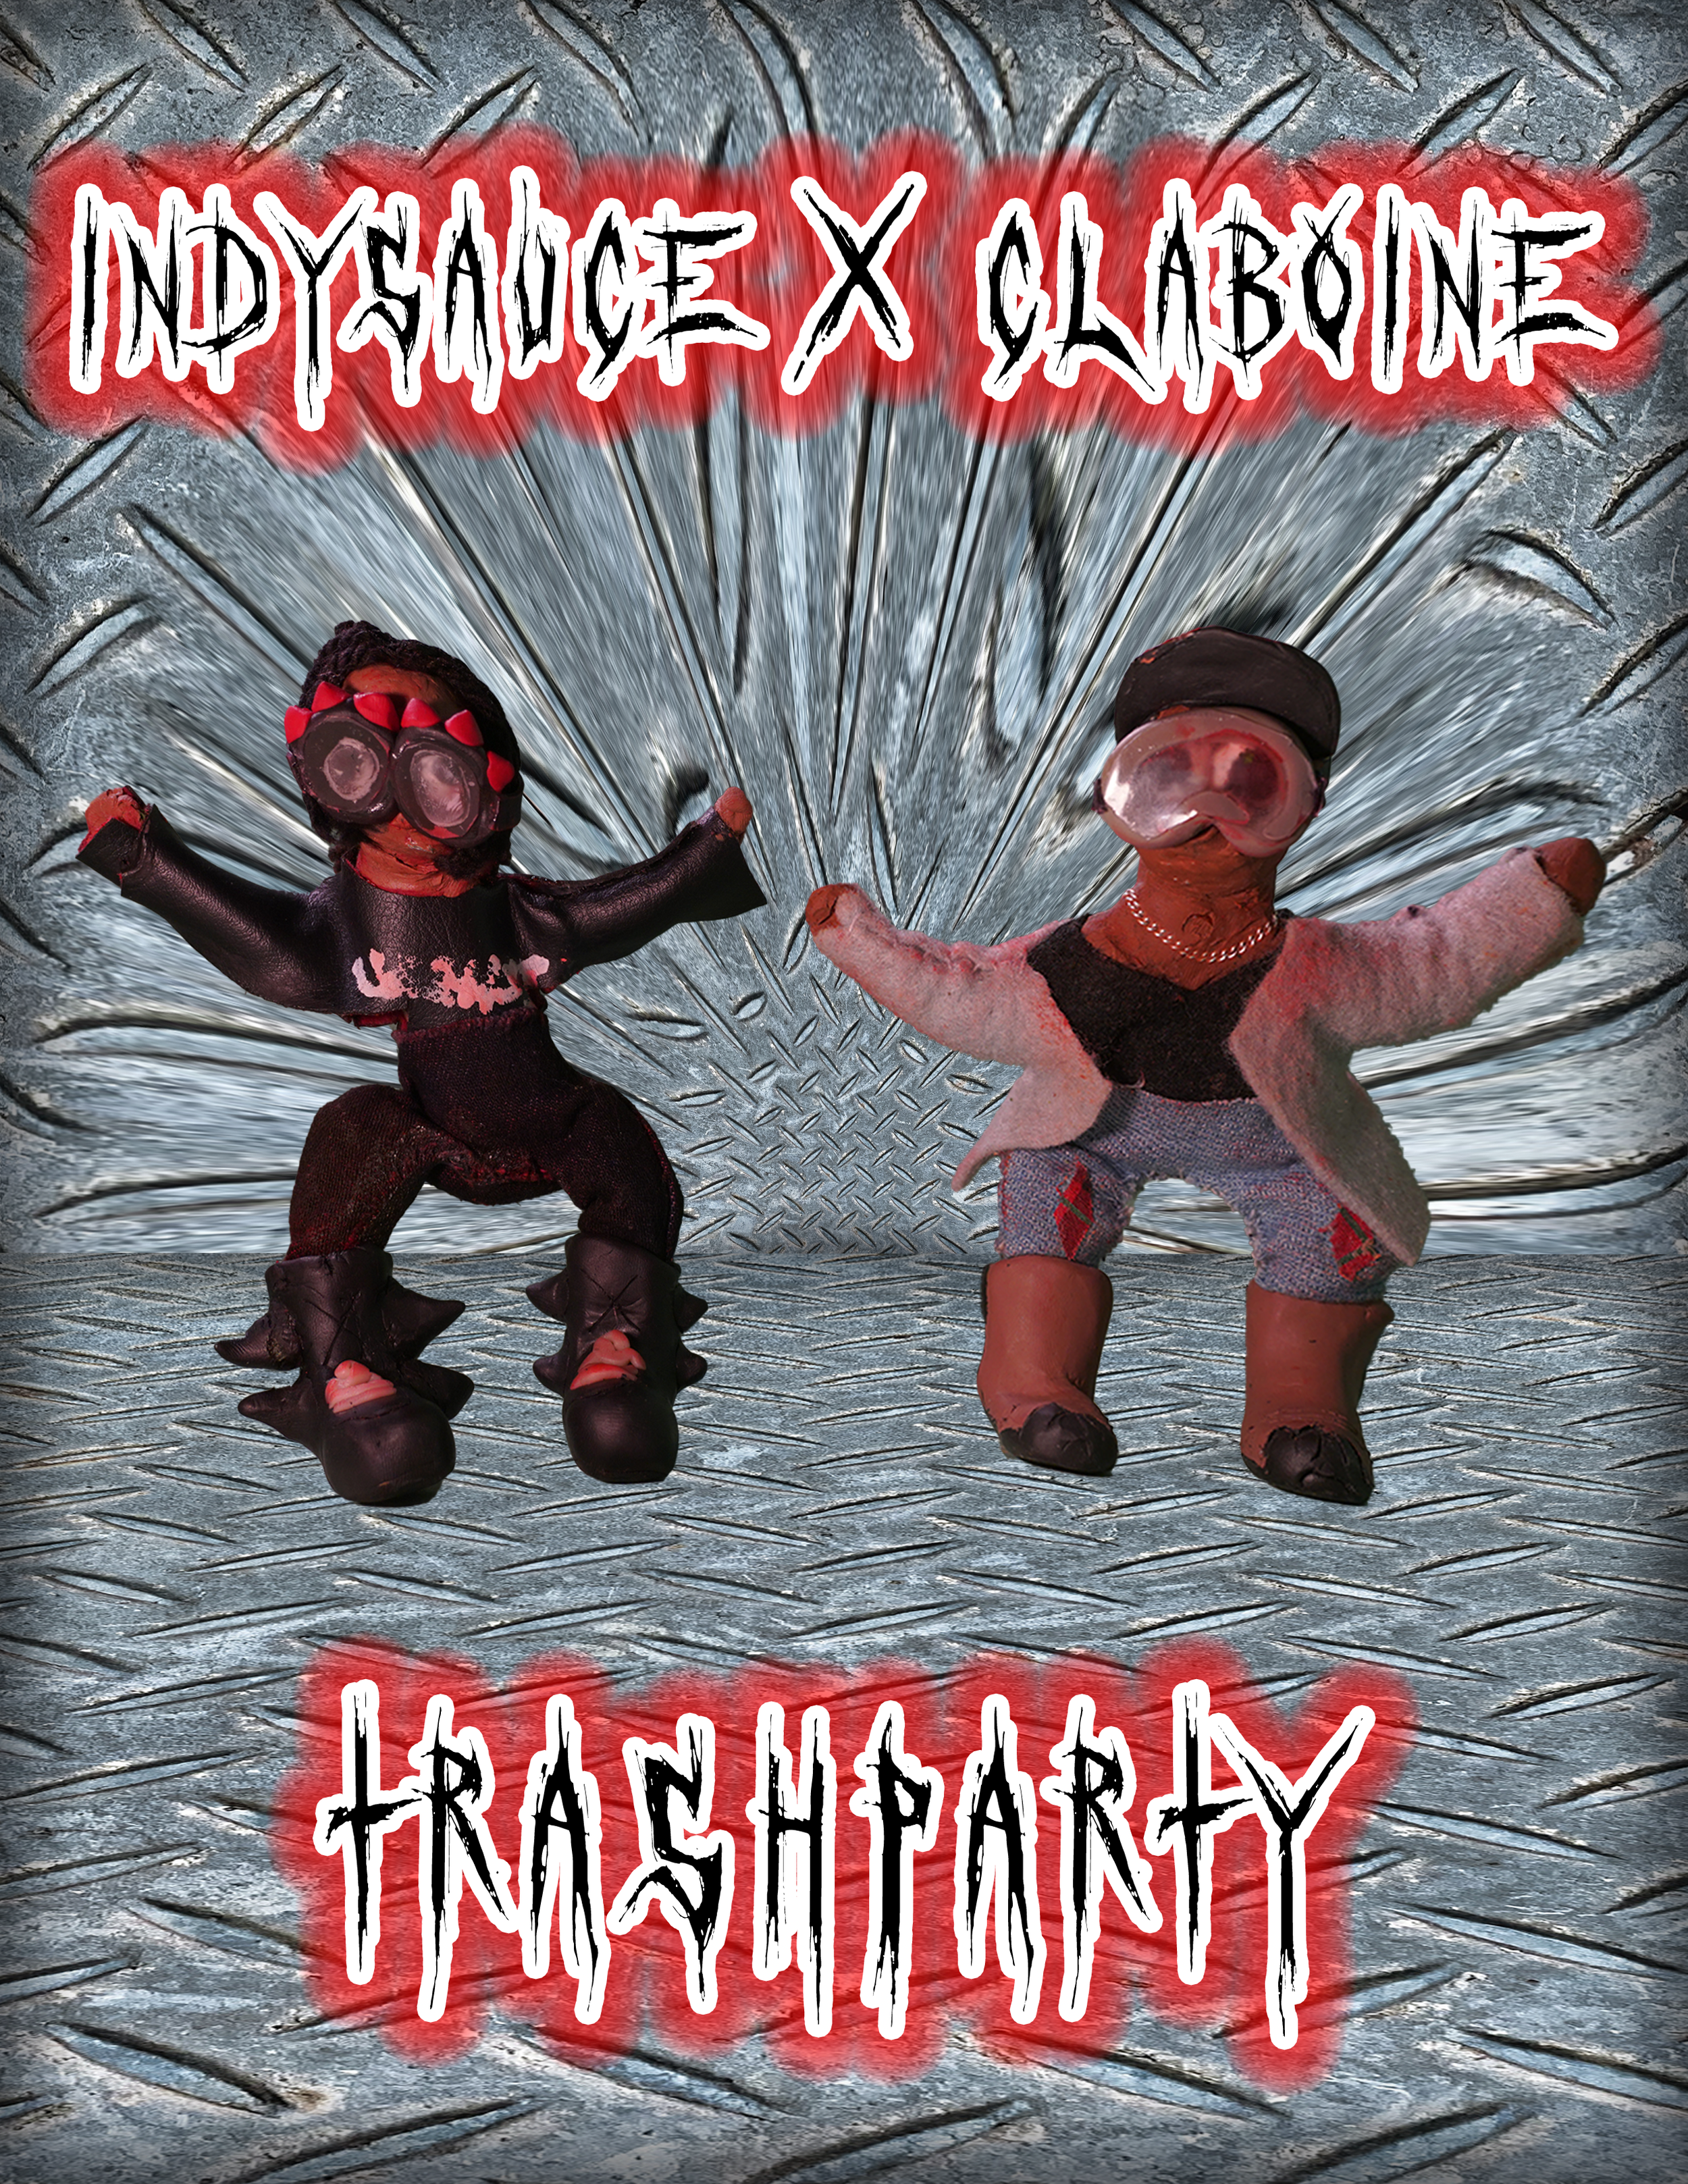 Indysauce x CLABOINE - TRA$HPARTY